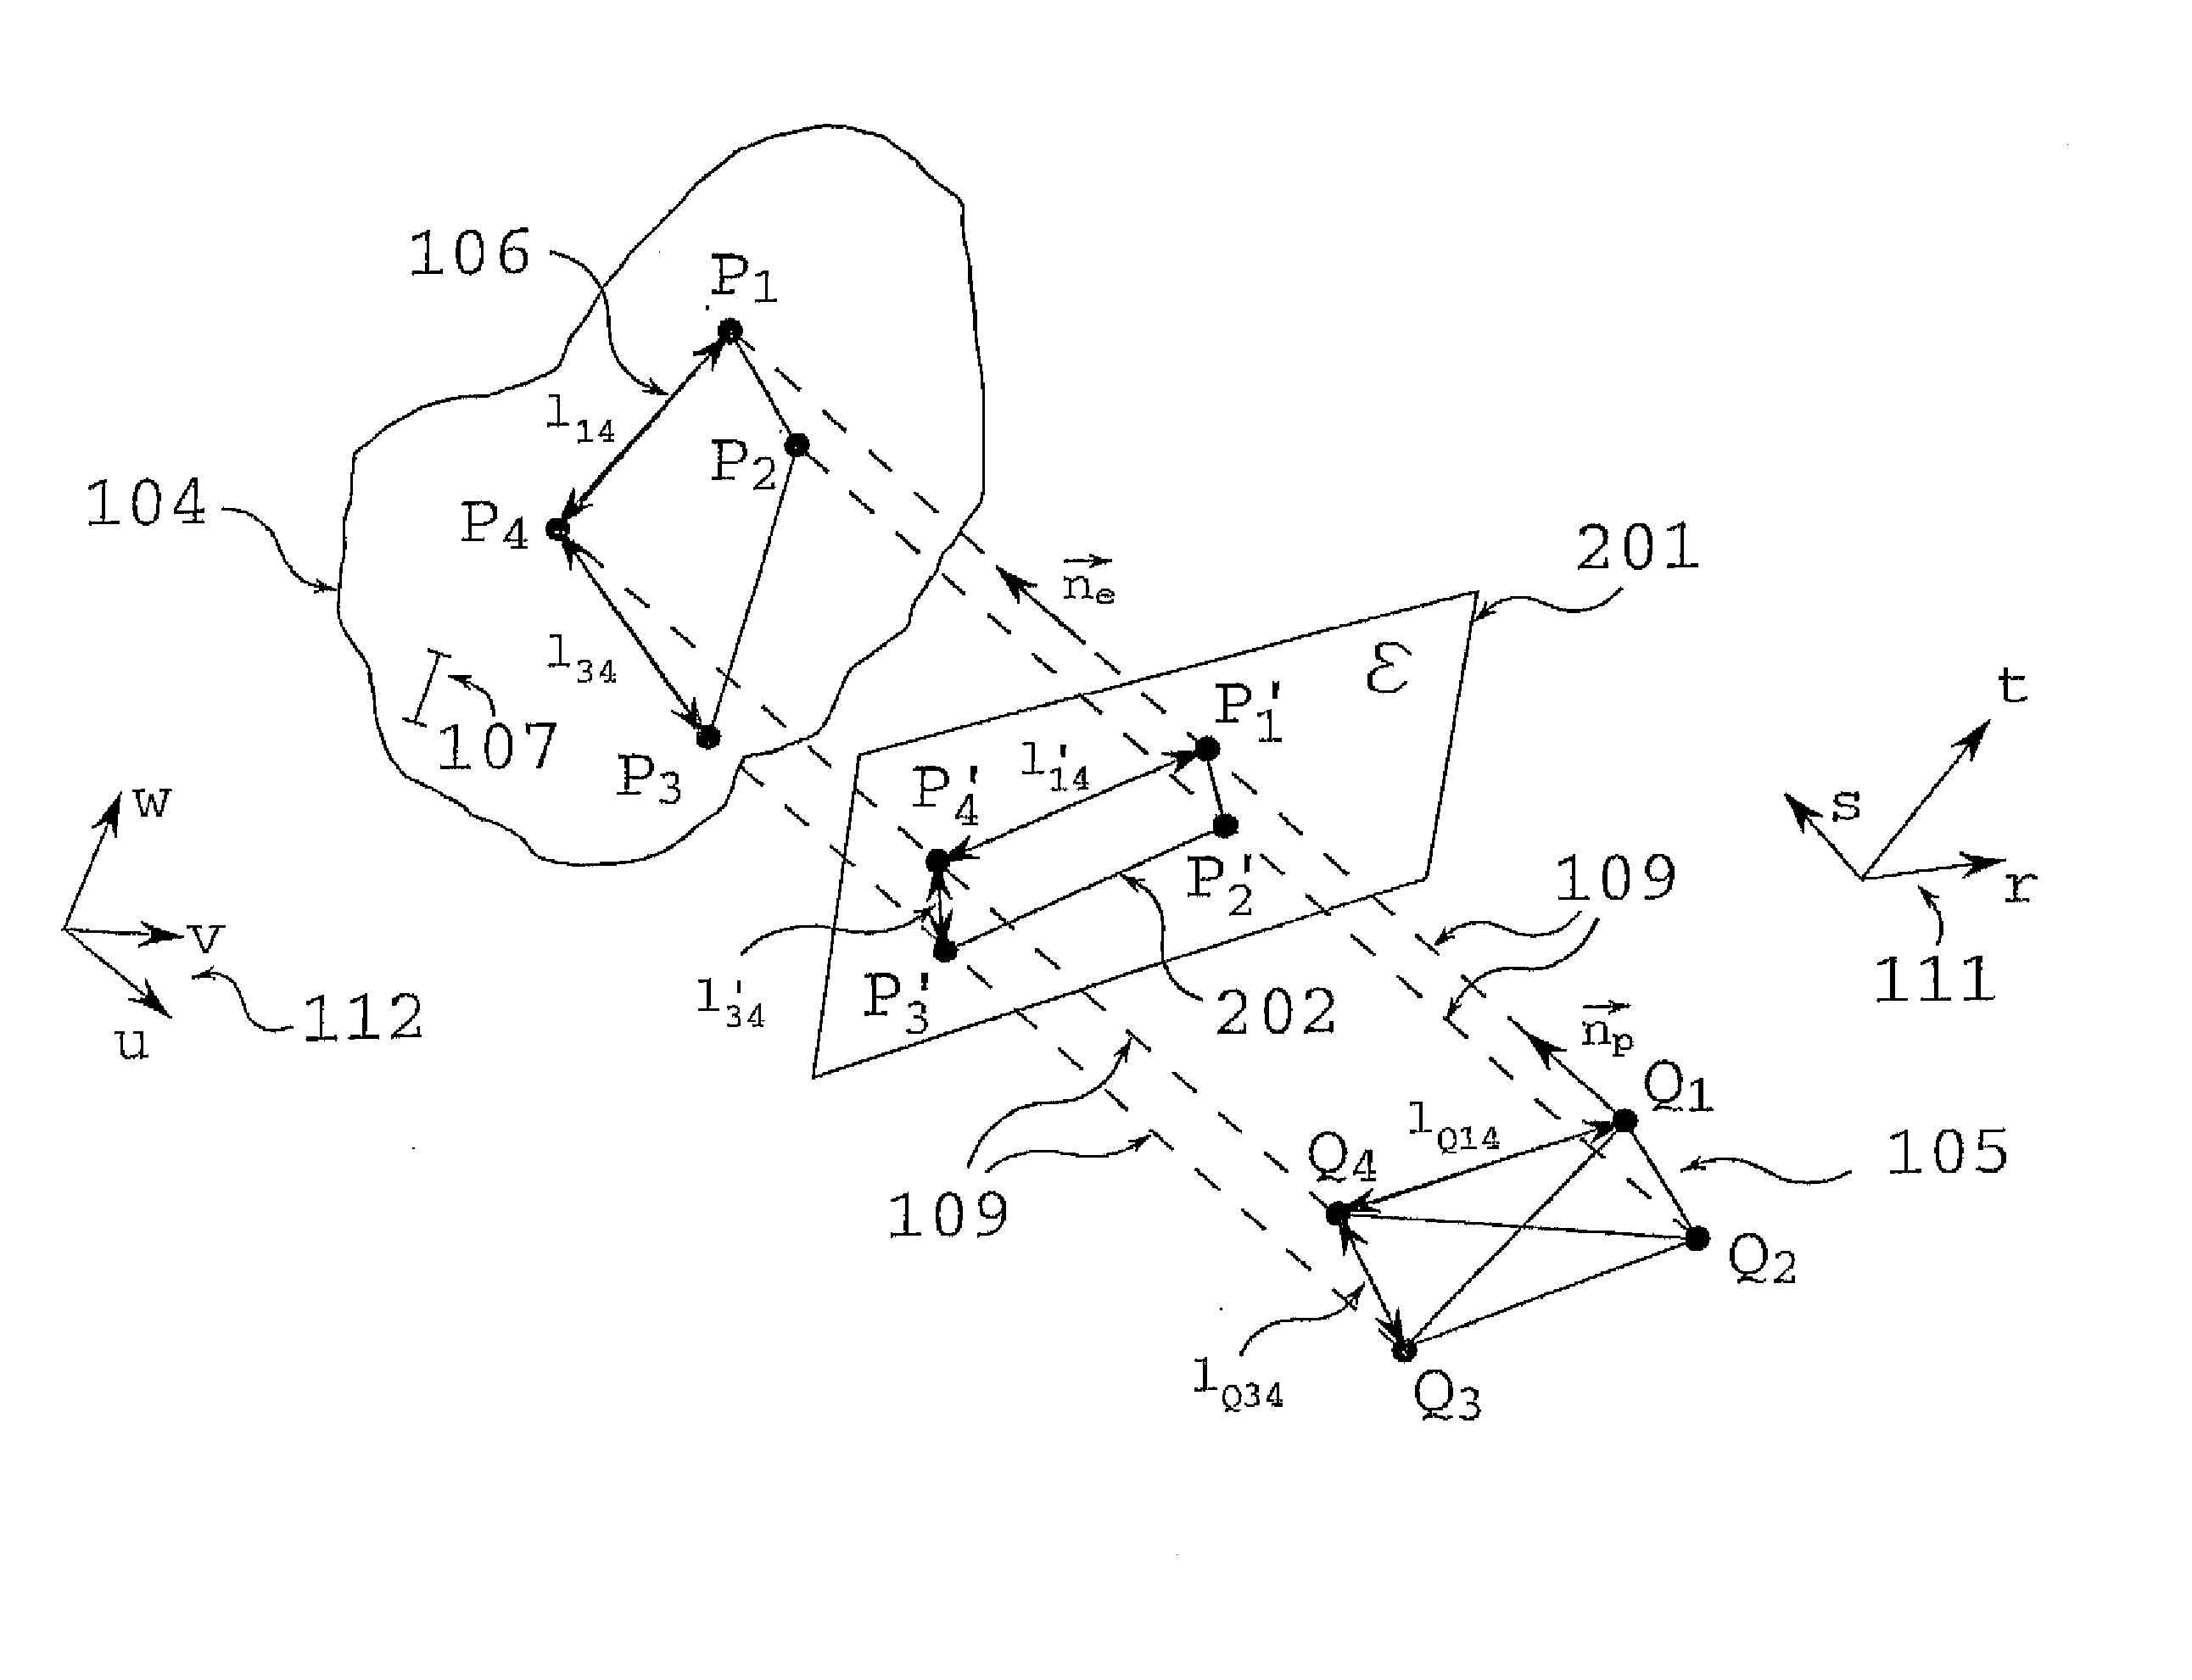 Mobile Projection System For Scaling And Orientation Of Surfaces Surveyed By An Optical Measuring System